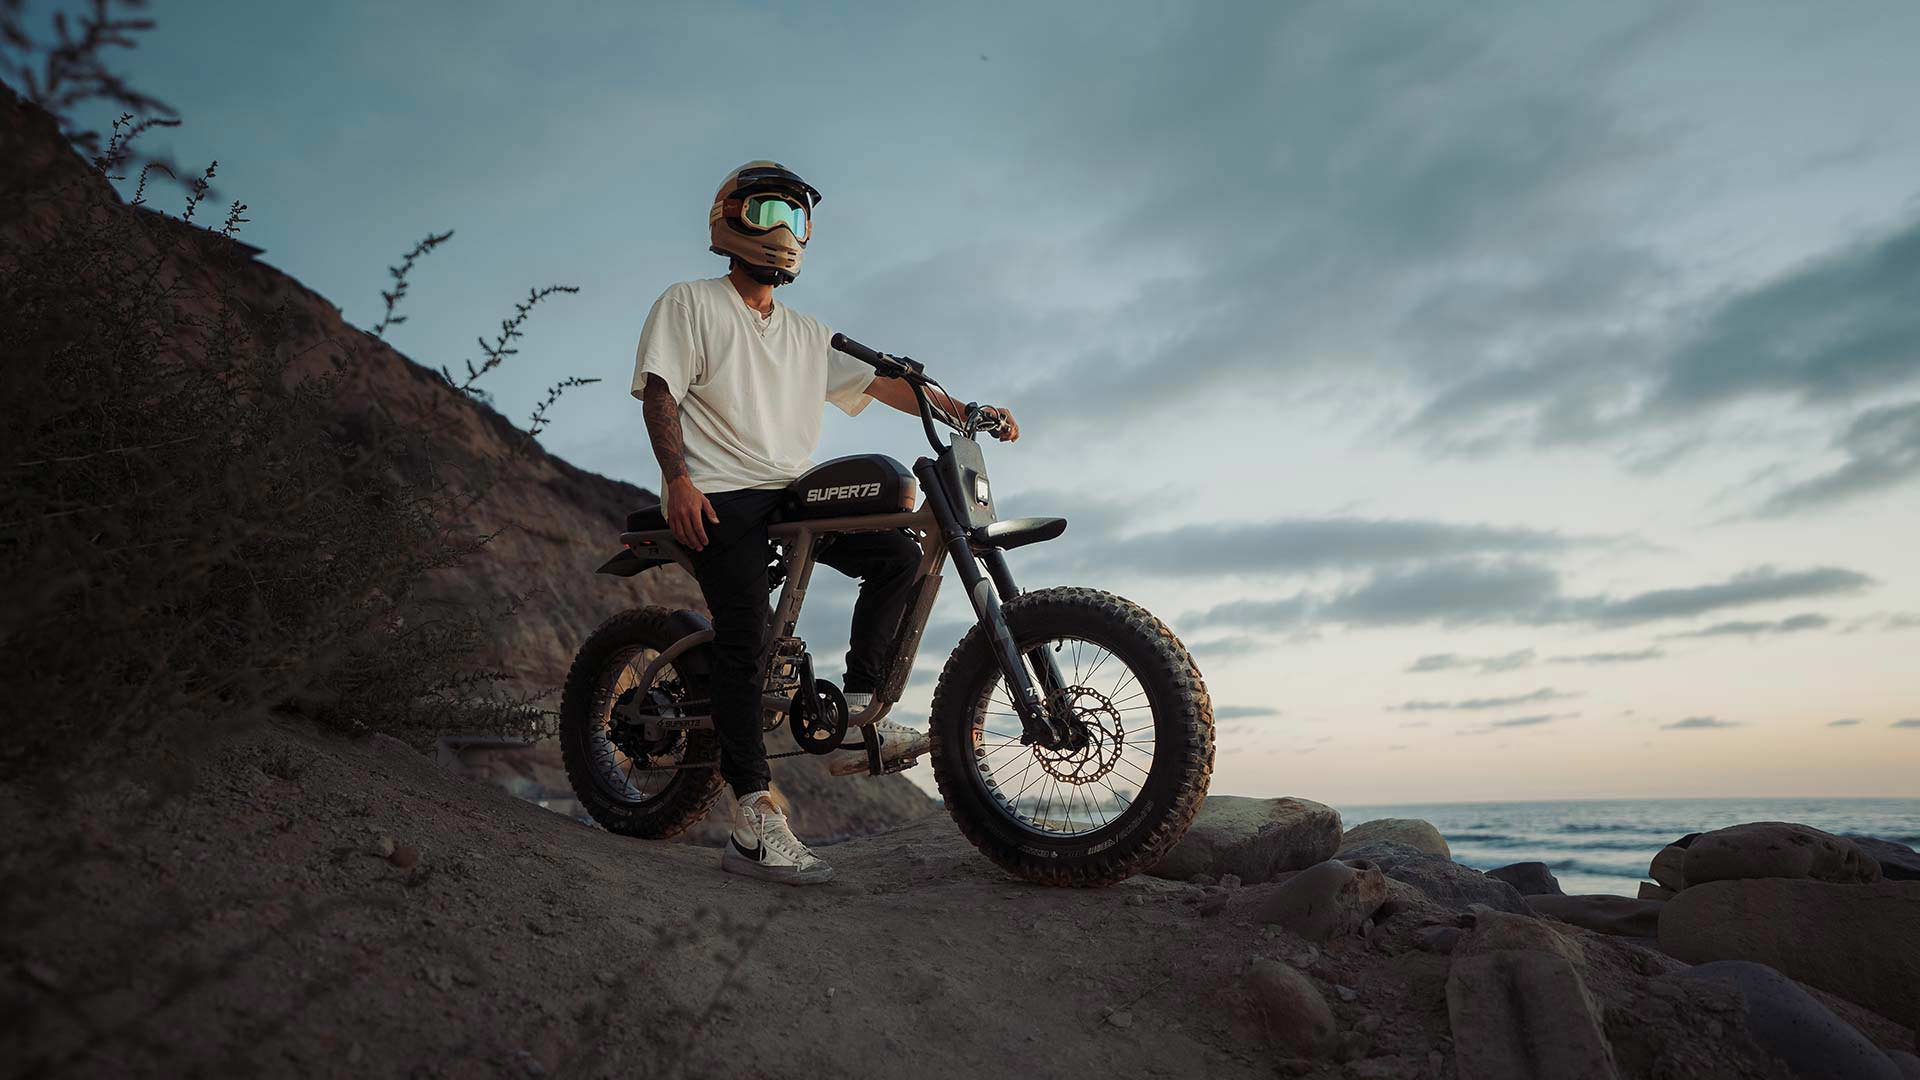 Young man sitting on a Super73 ebike with a helmet on looking into the sunset